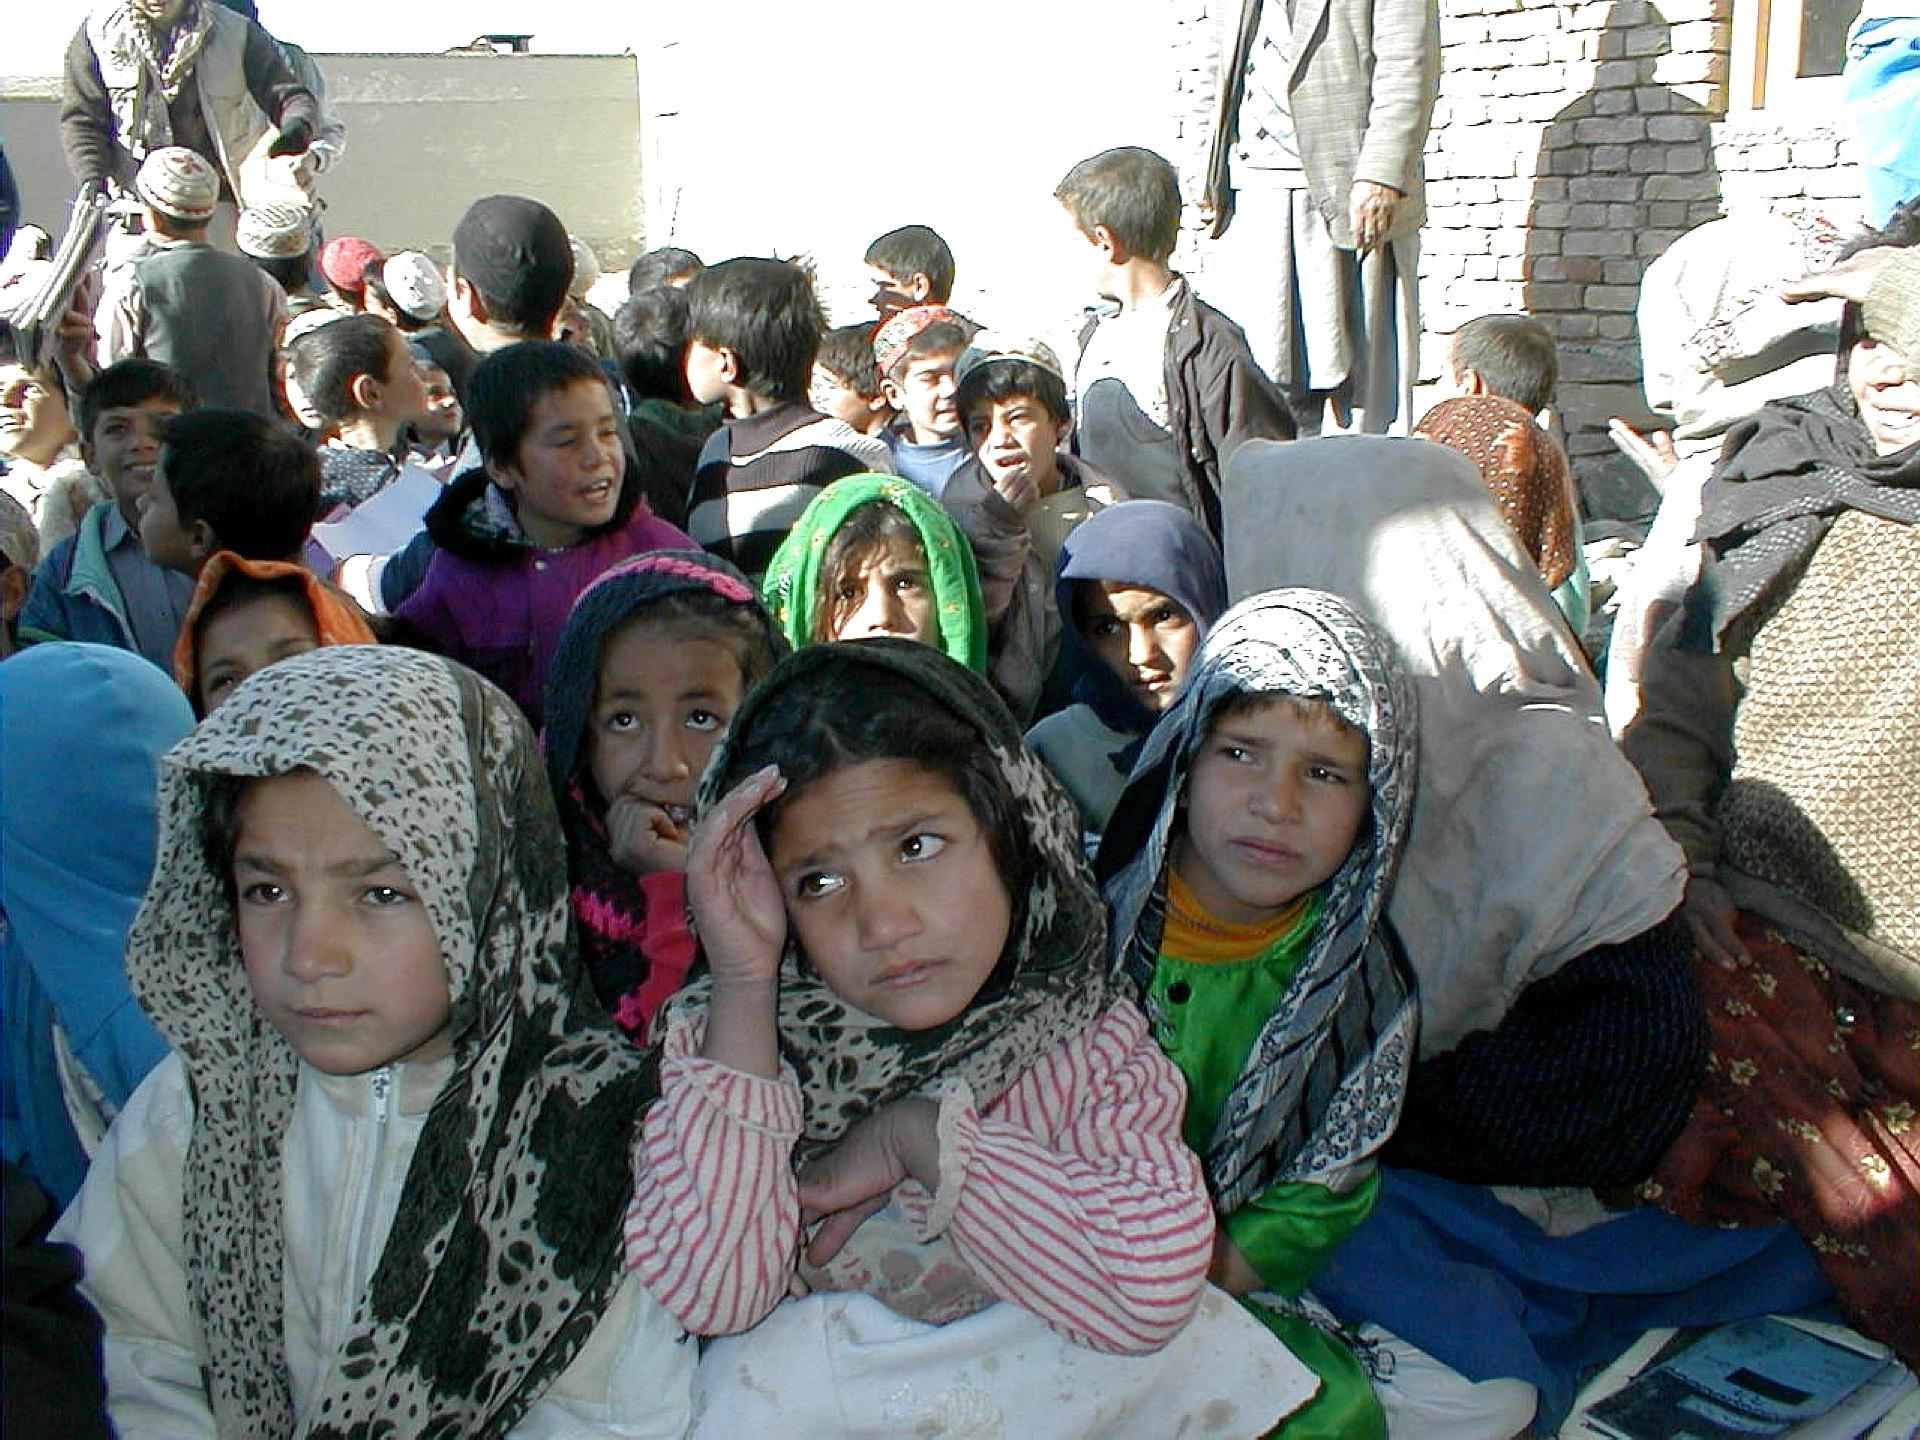 Time to step up: Will Denmark take a positive attitude towards Afghan refugees?